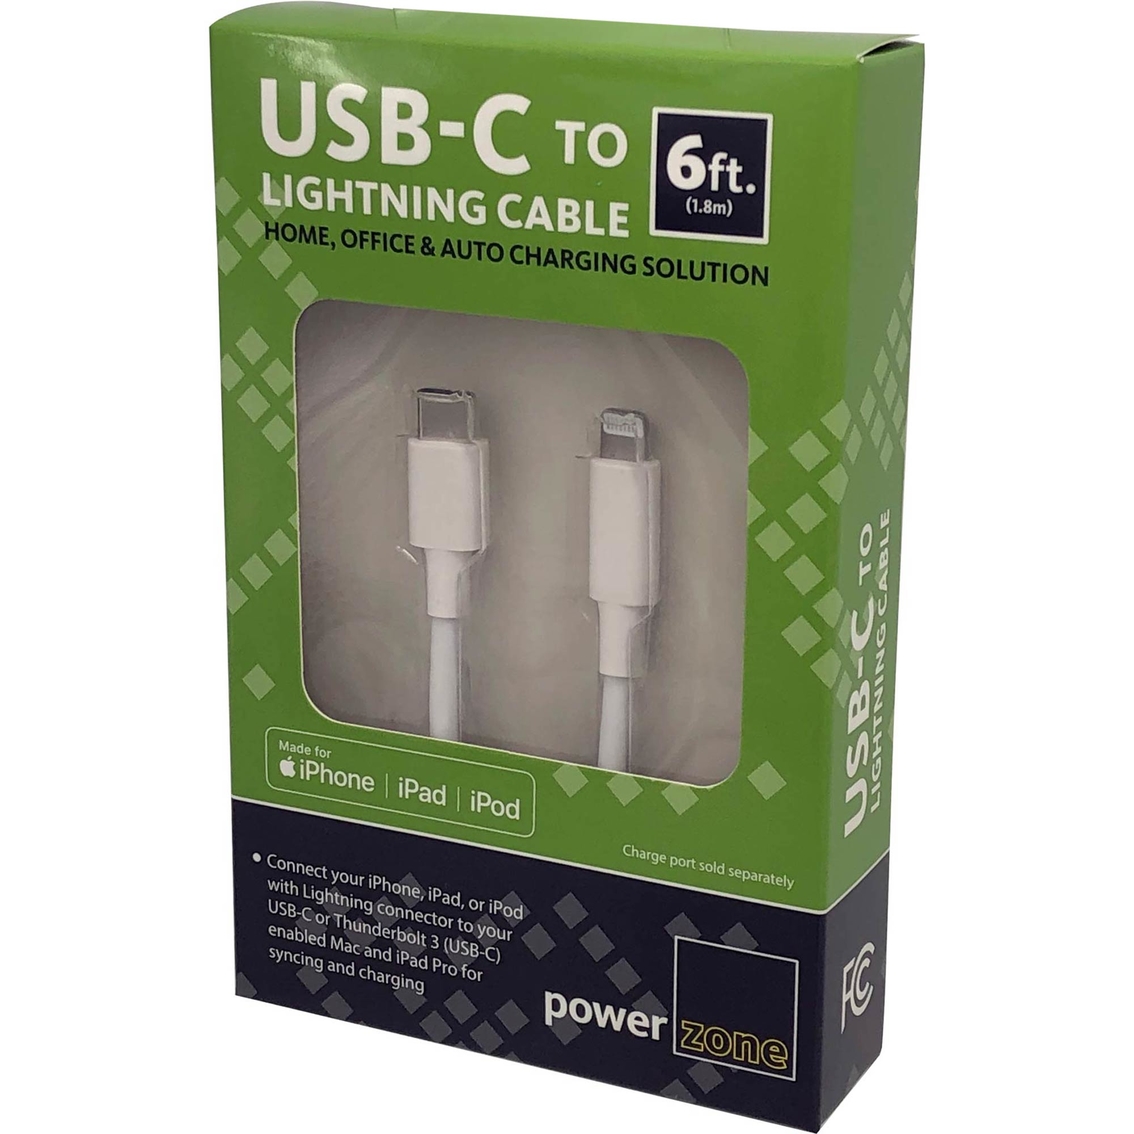 USB Type C to Lightning Cable 6ft White - Image 3 of 3